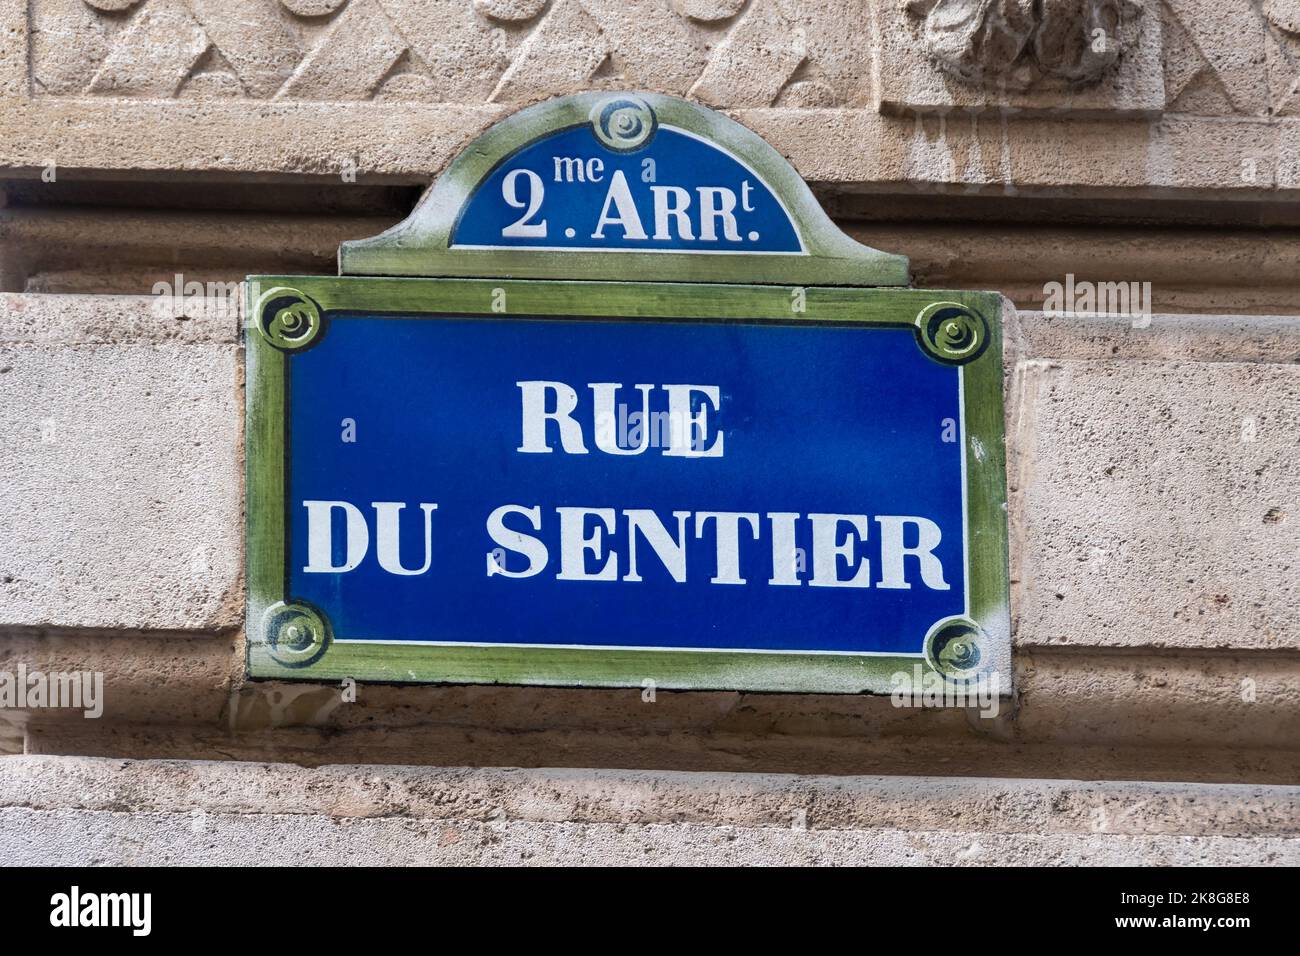 Traditional Parisian street sign with 'Rue du Sentier' written on it, located in the area specializing in the textile industry in Paris, France Stock Photo